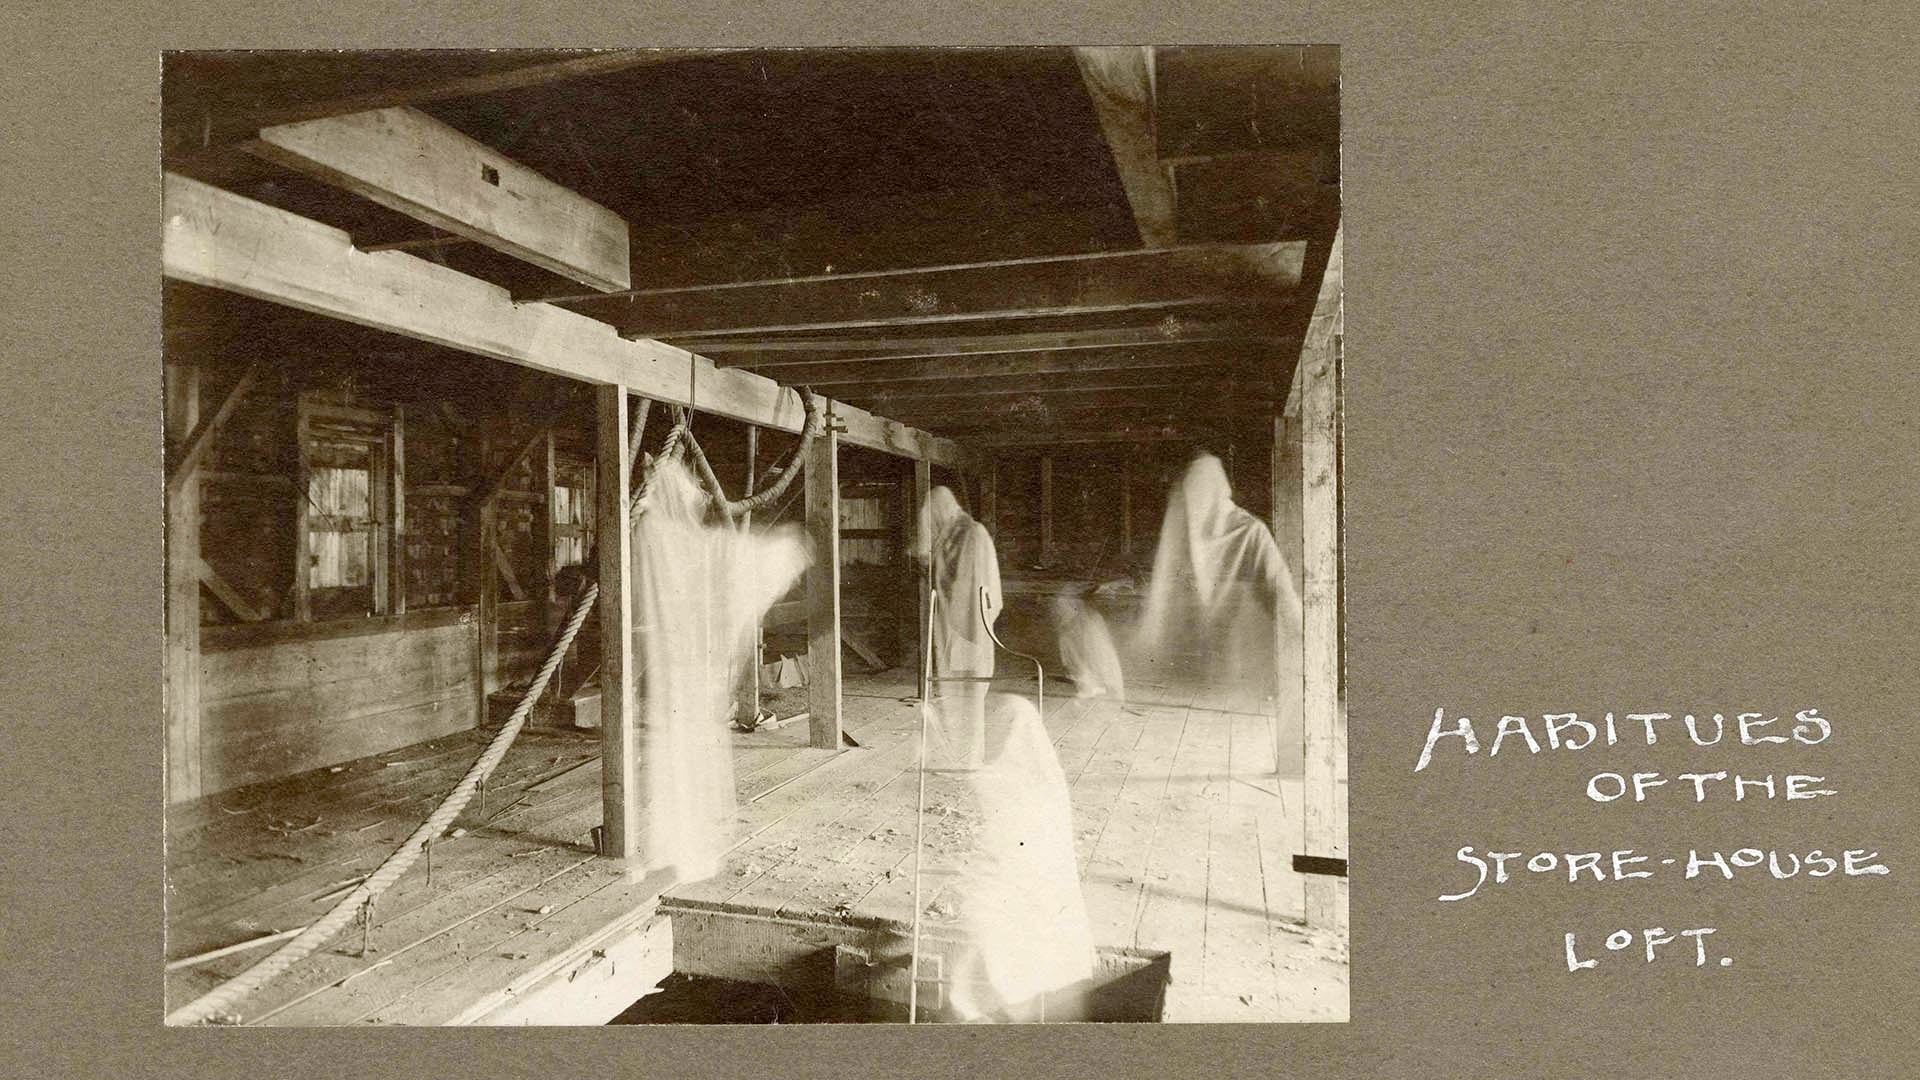 image of Ghostly Habitues Store-house loft